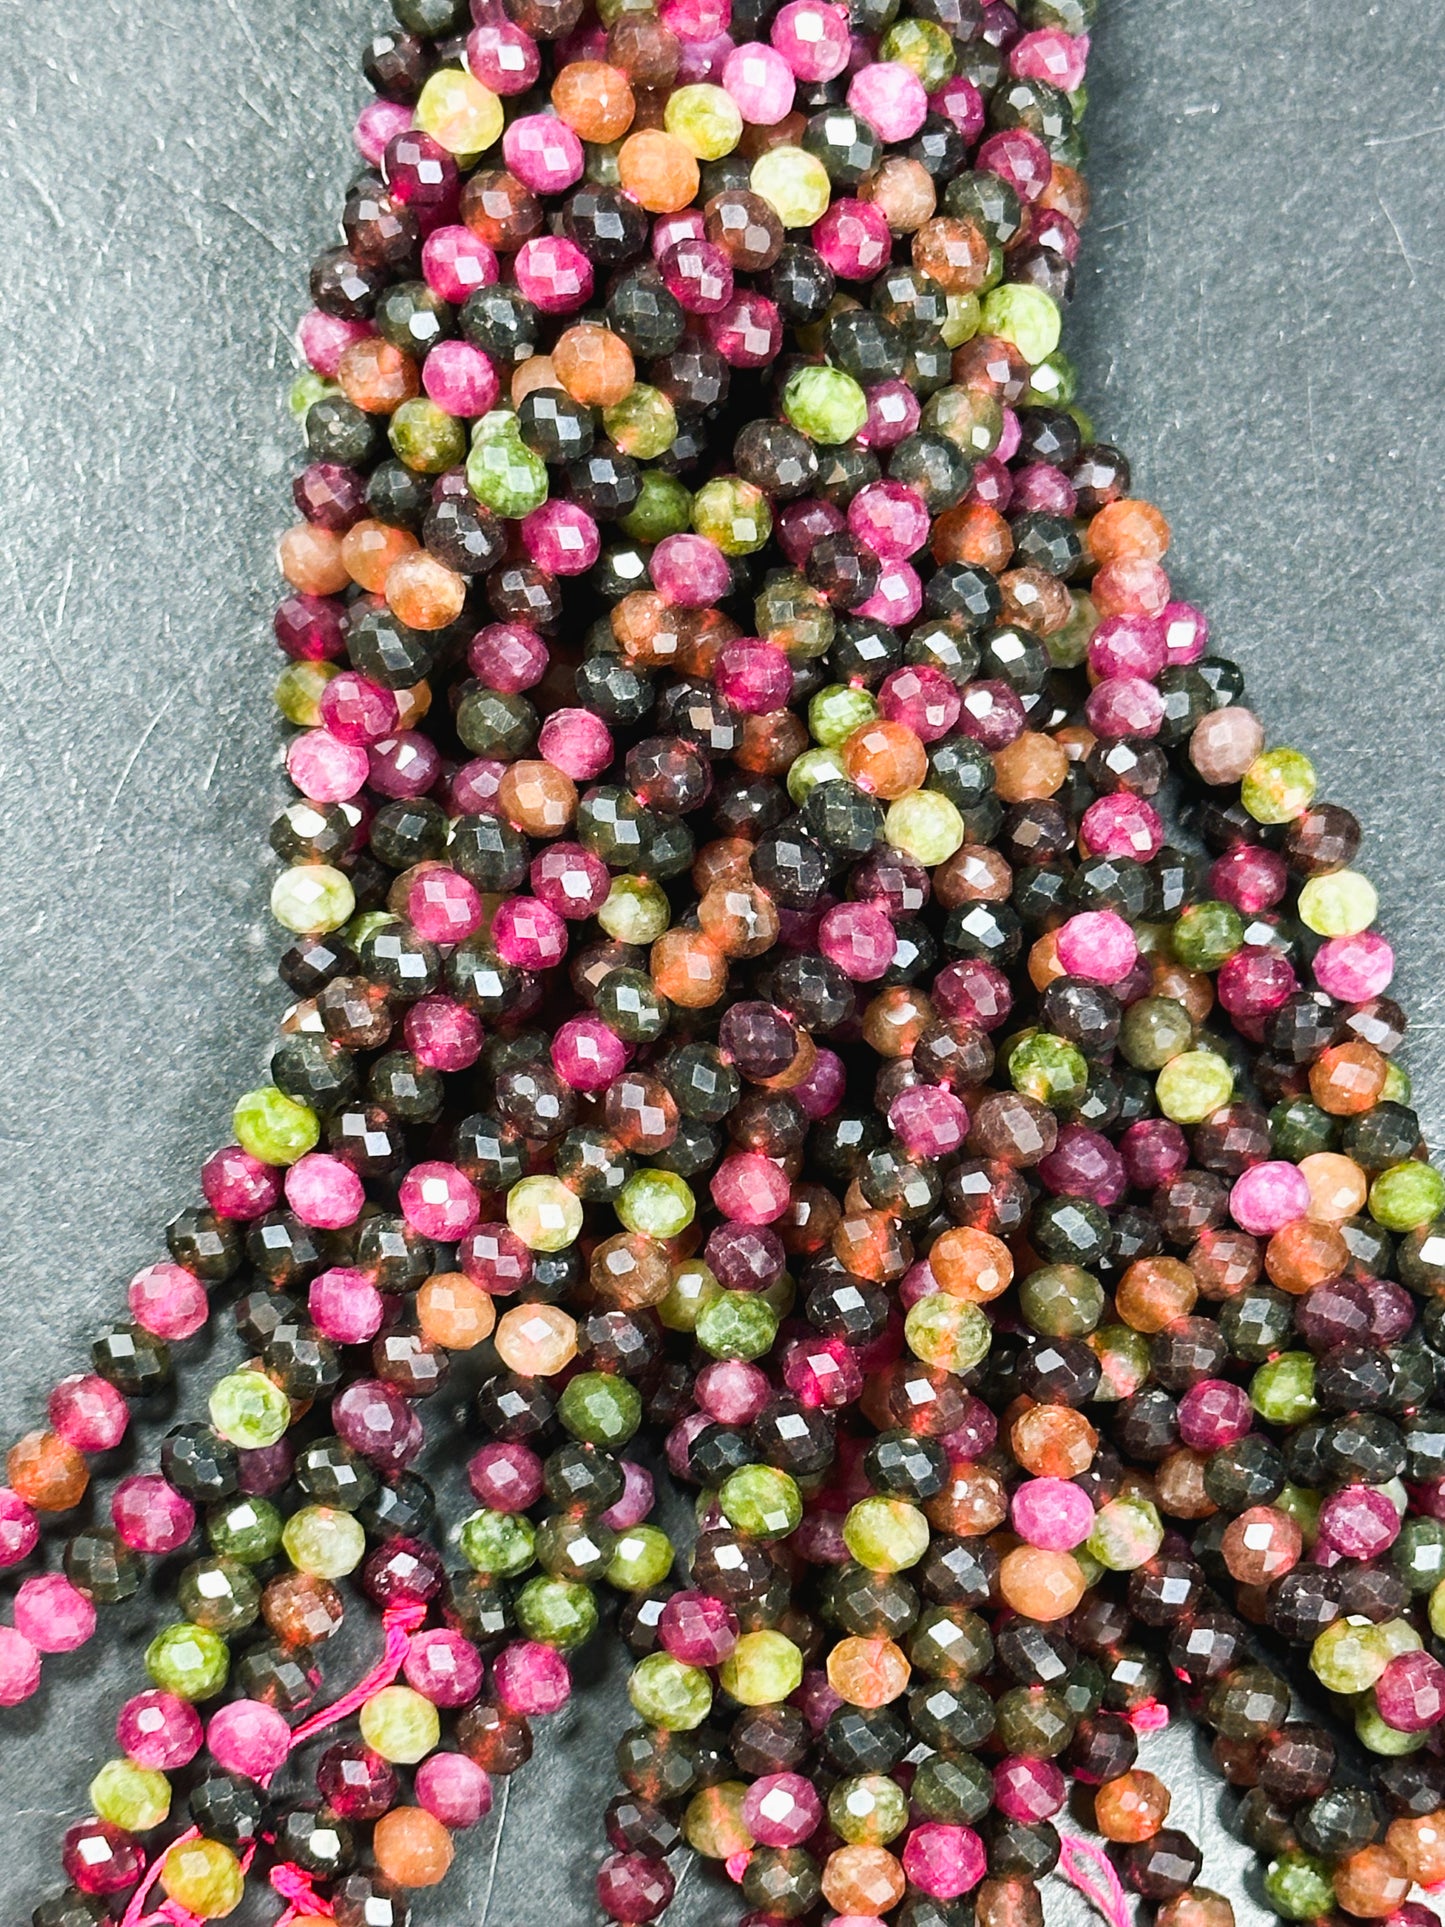 NATURAL Tourmaline Gemstone Bead Faceted 6x5mm 8x6mm Rondelle Shape, Beautiful Multicolor Tourmaline Gemstone Bead Great Quality Full Strand 15.5"